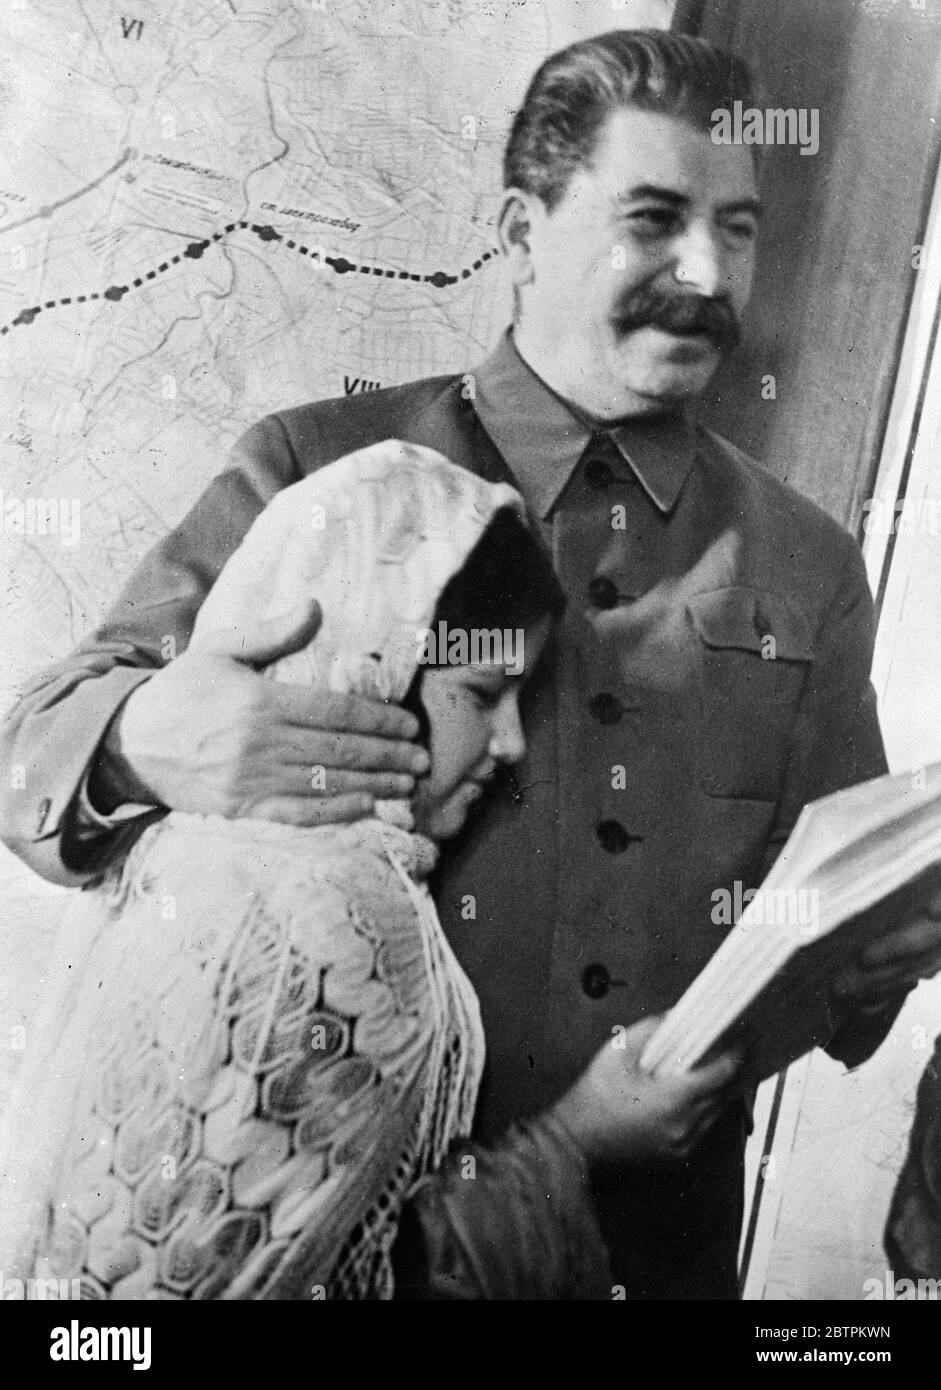 Stalin the paternal . His arm resting affectionately on the cheek of 11 year old Mamlakat Nakhengove , Joseph Stalin , ruler of 160 , 000 , 000 Russians , smilingly receives a copy of the book ' Stalin about Lenin ' in the Tajik language . Mamlekat , a schoolgirl from Tajikistan Republic , travelled specially to Moscow to present her gift to Stalin . 11 December 1935 Stock Photo